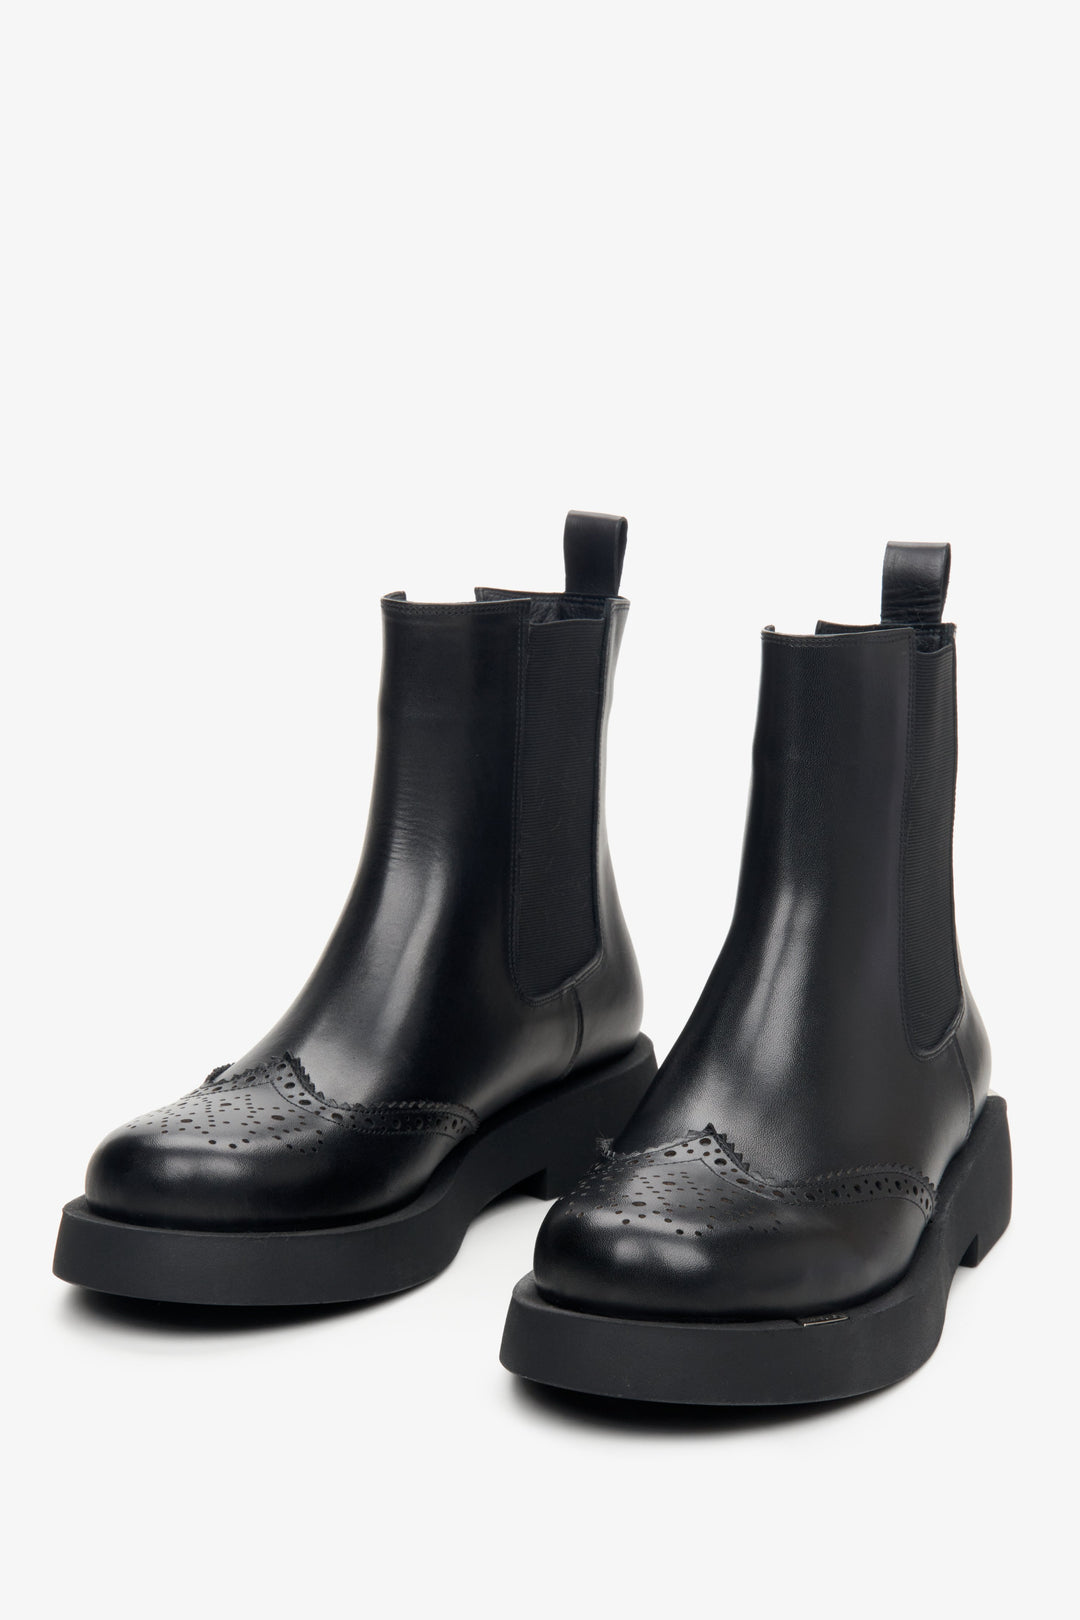 Women's black leather Estro Chelsea boots - close-up on the toe.